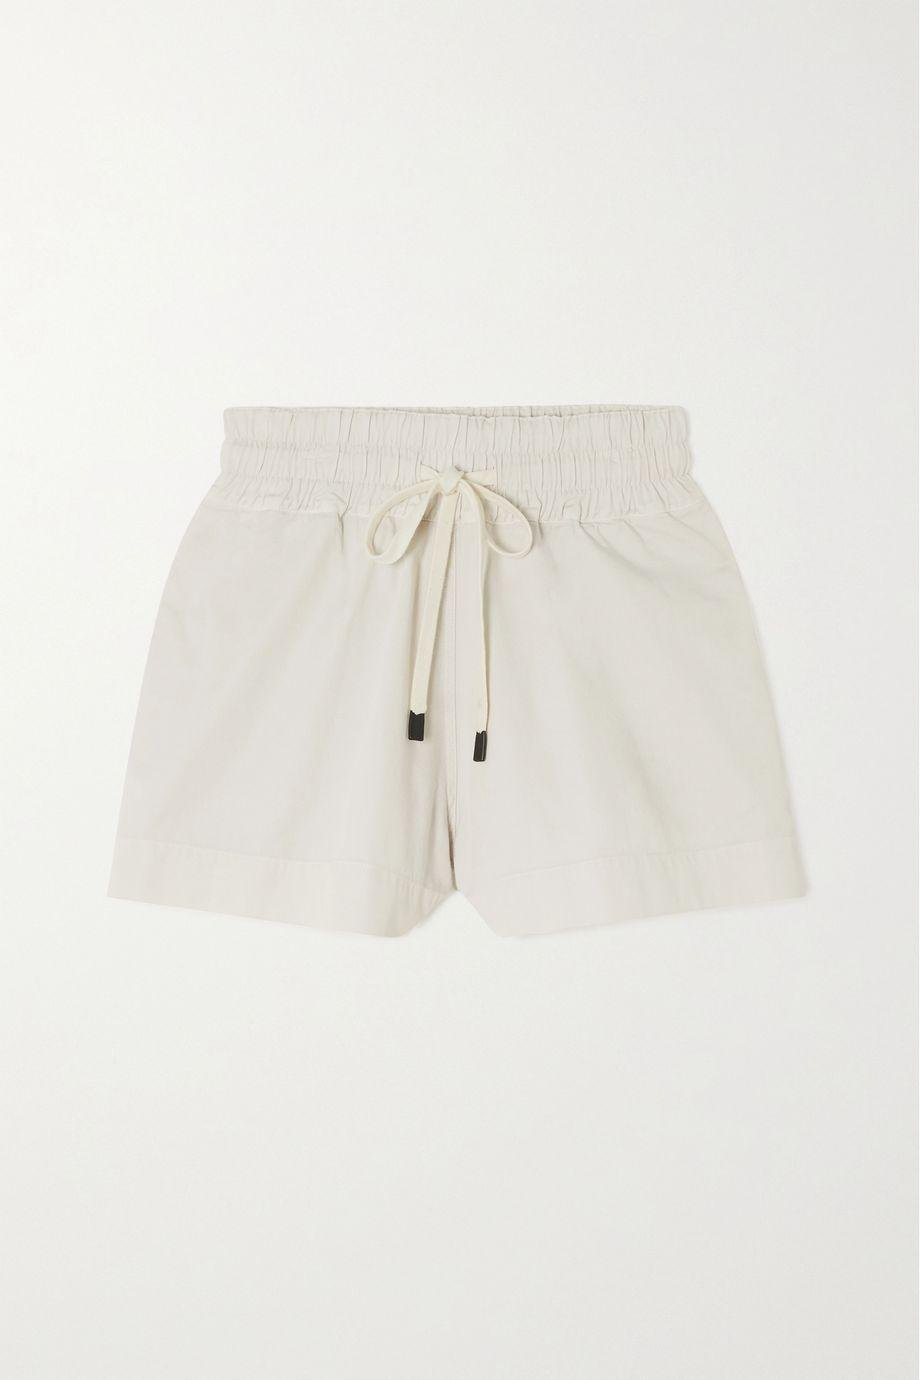 + NET SUSTAIN cotton-twill shorts by BASSIKE